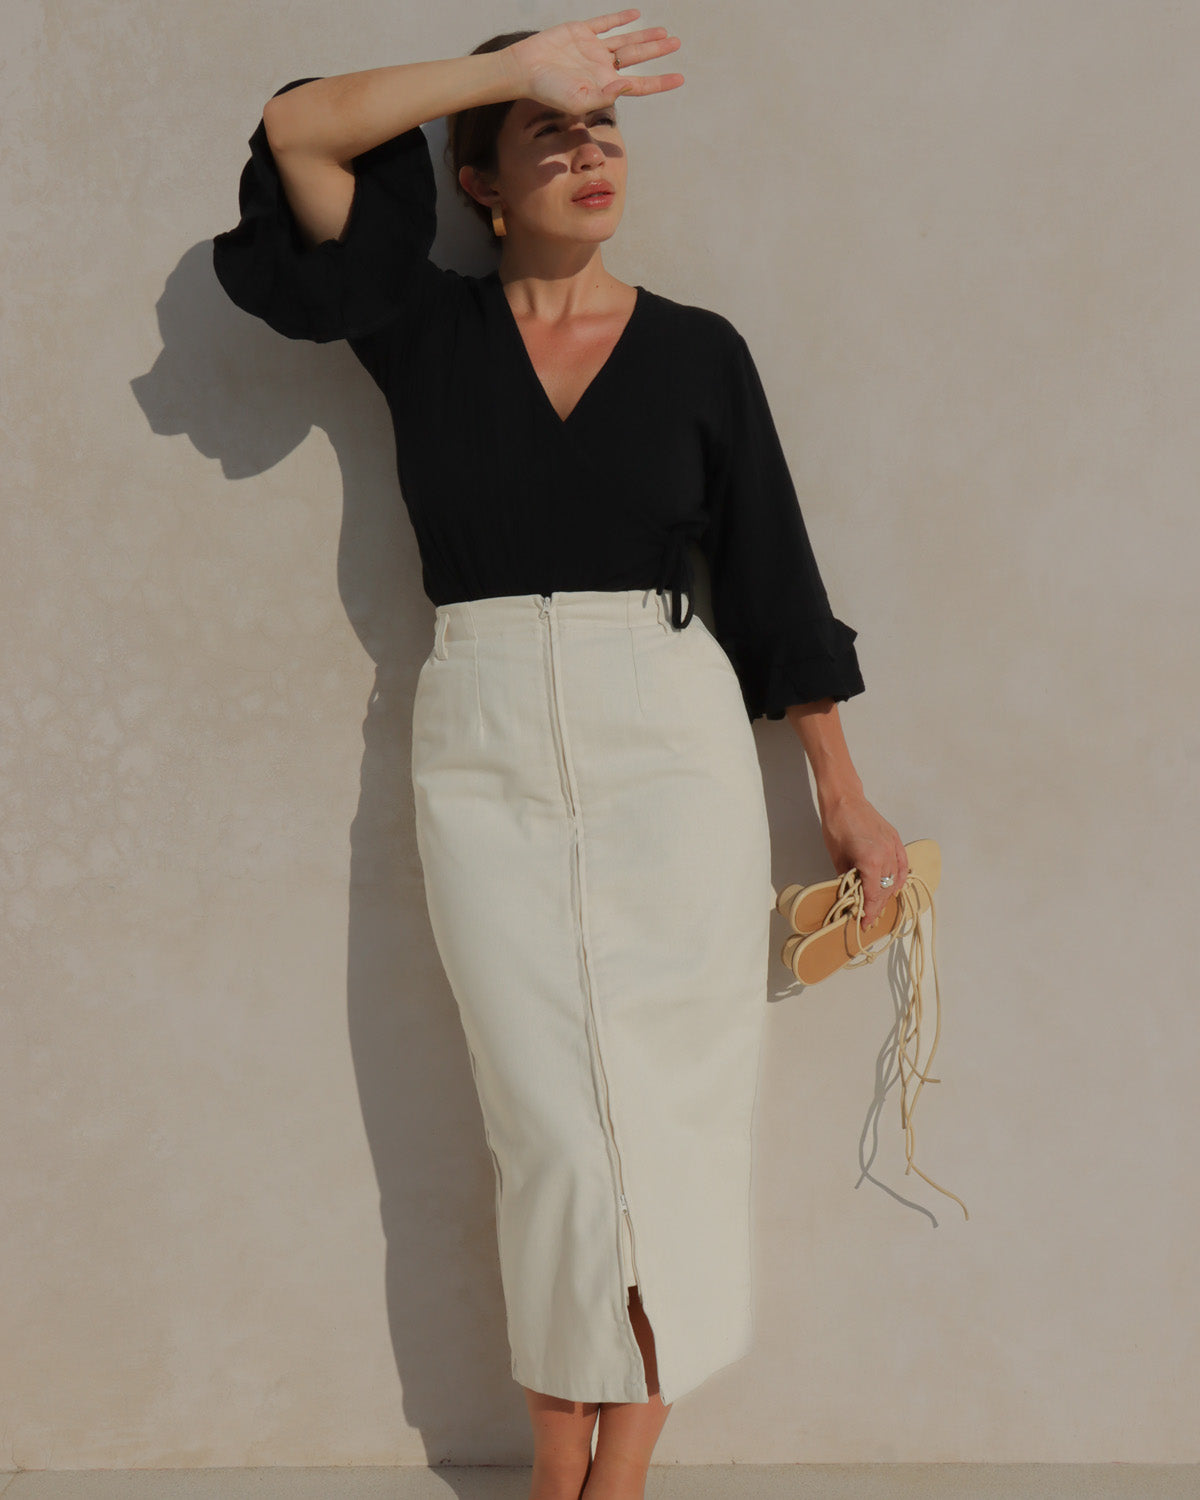 creamy white pencil skirt with zipper front with pockets